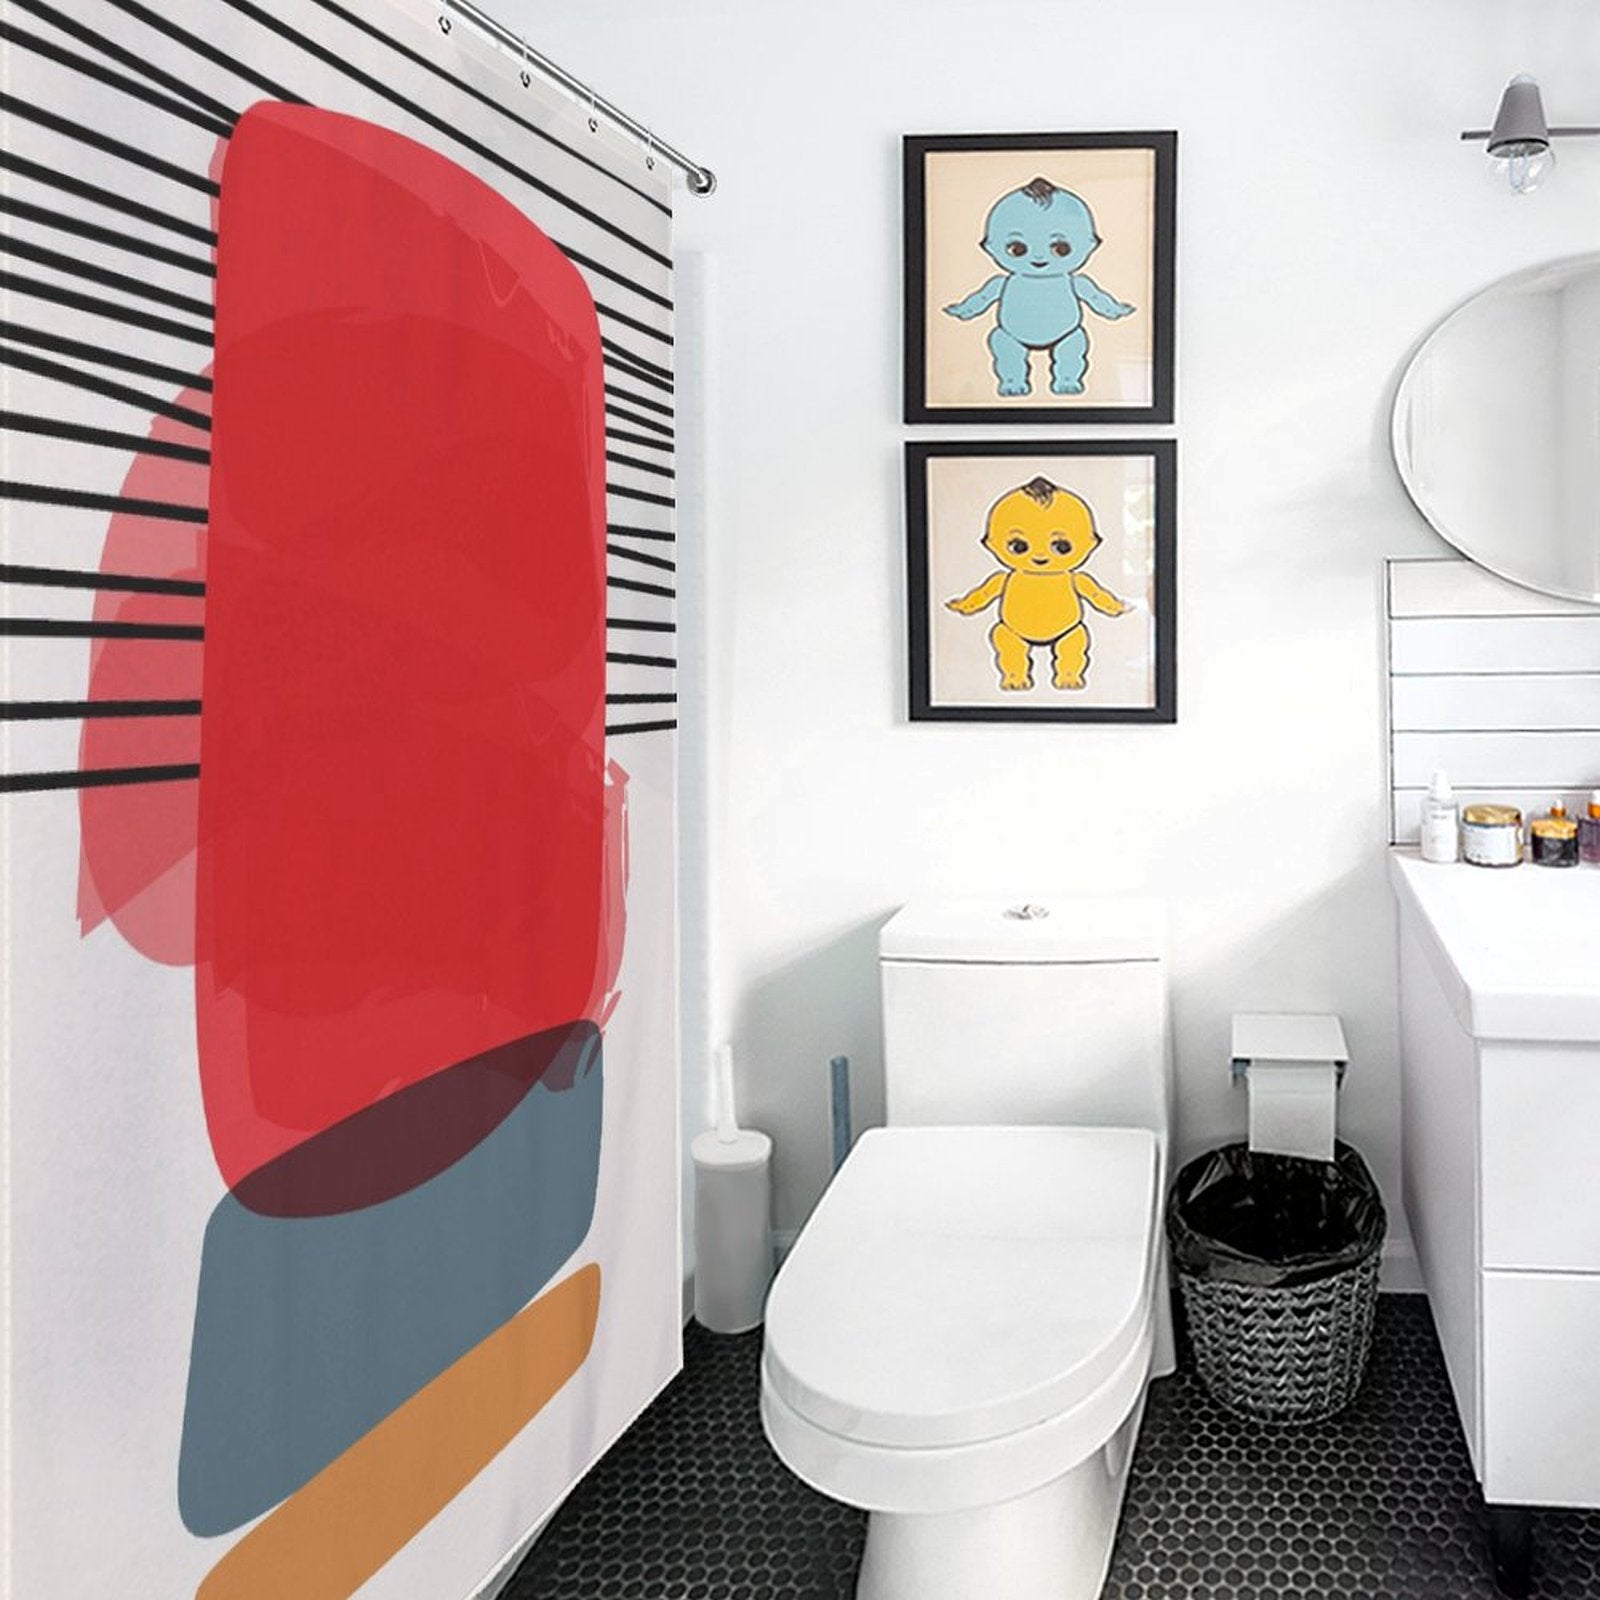 A modern bathroom with a white toilet, a round mirror above a sink, and a black trash bin. The Cotton Cat shower curtain features bold abstract art that seamlessly blends with the modern geometric art theme. Two framed artworks of cartoon characters adorn the wall, adding a whimsical touch to the decor.